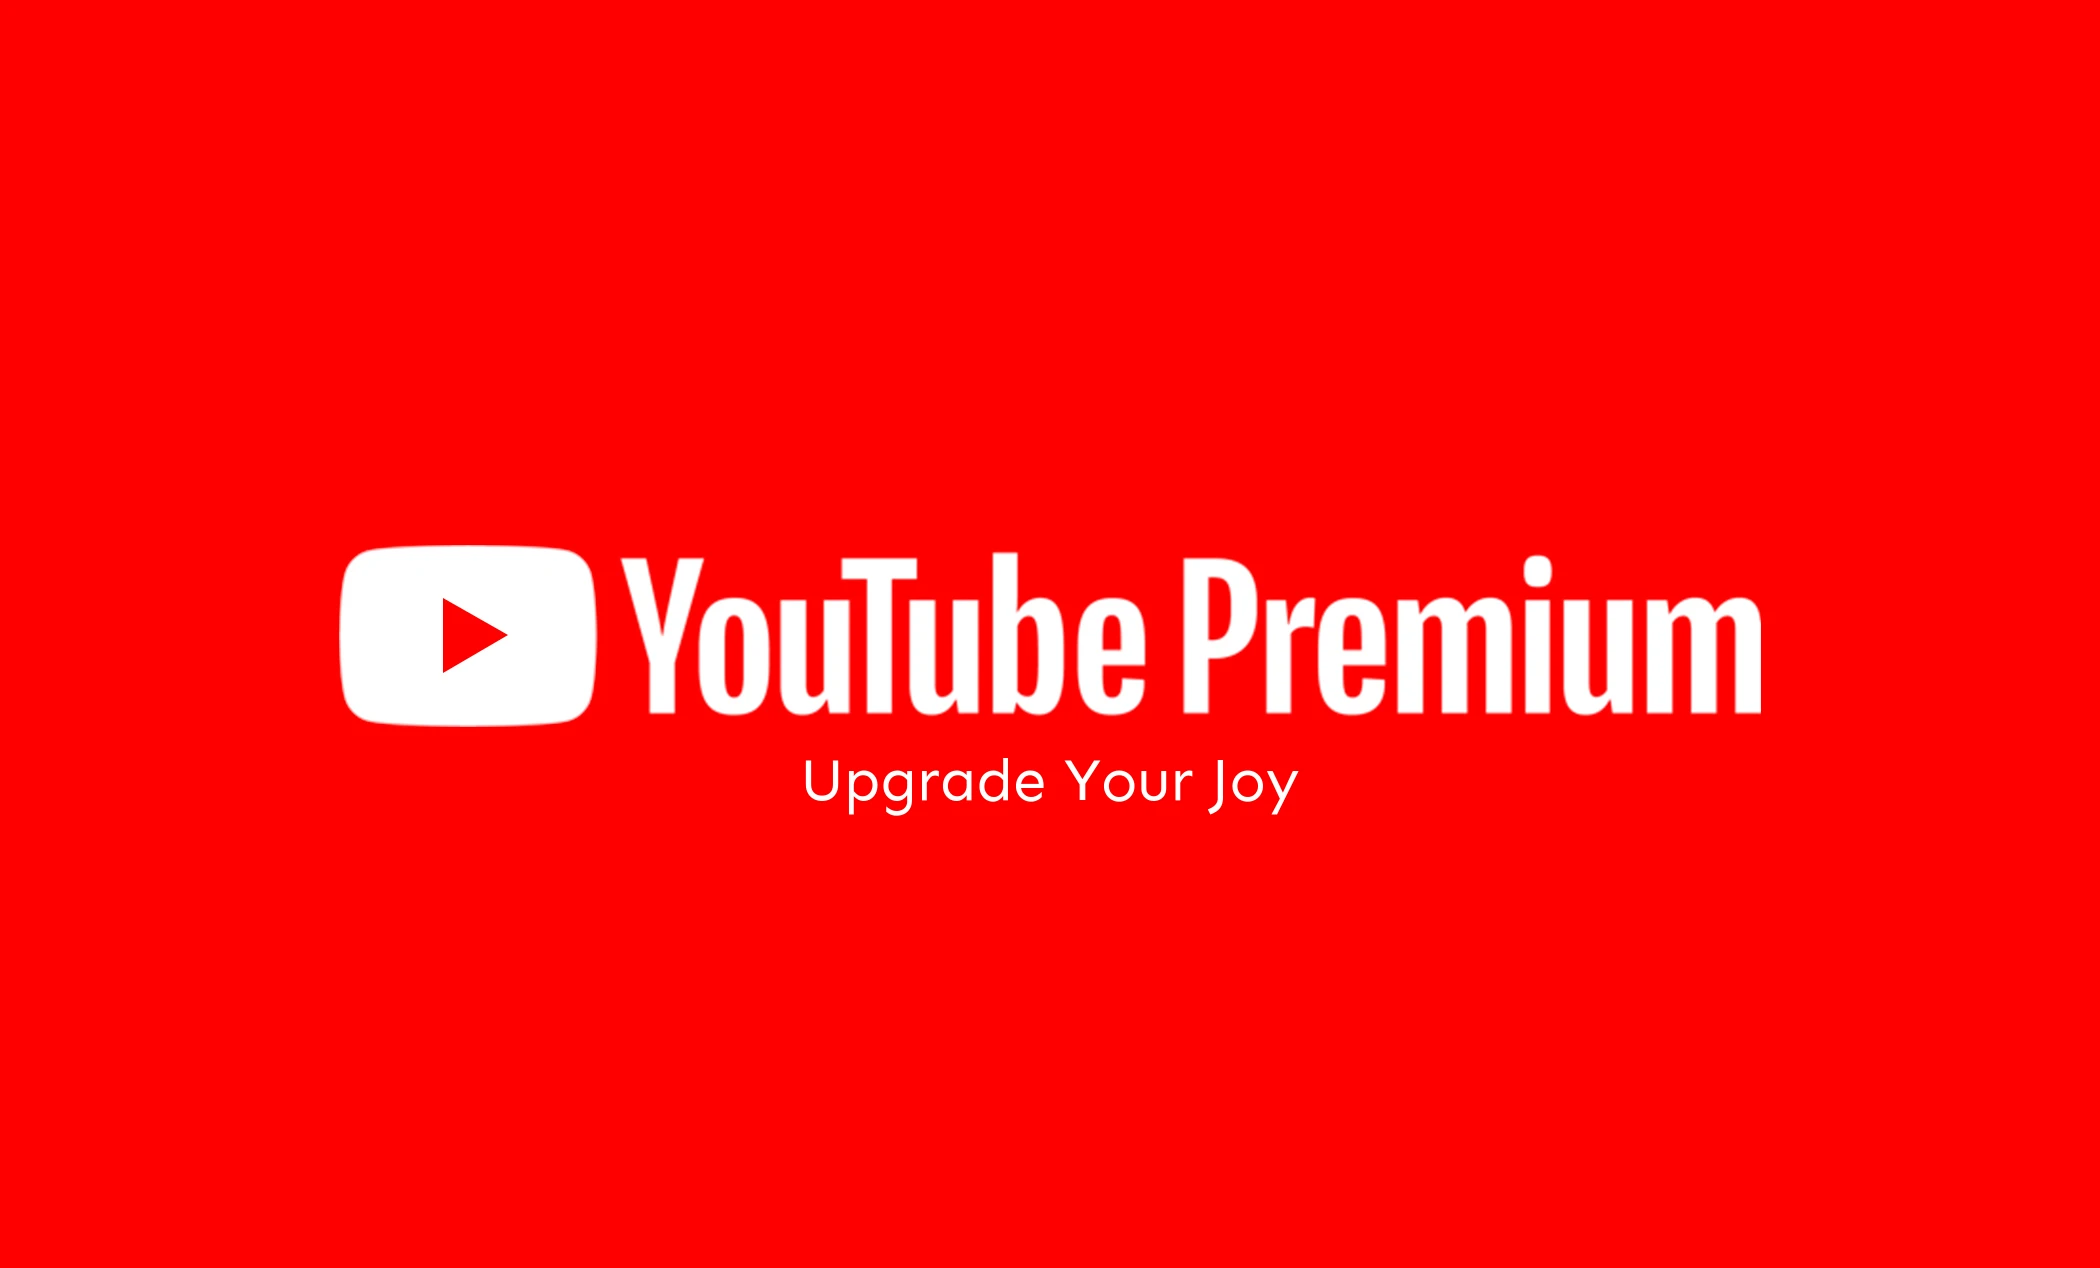 How to Download and Install YouTube Premium Mod Apk: